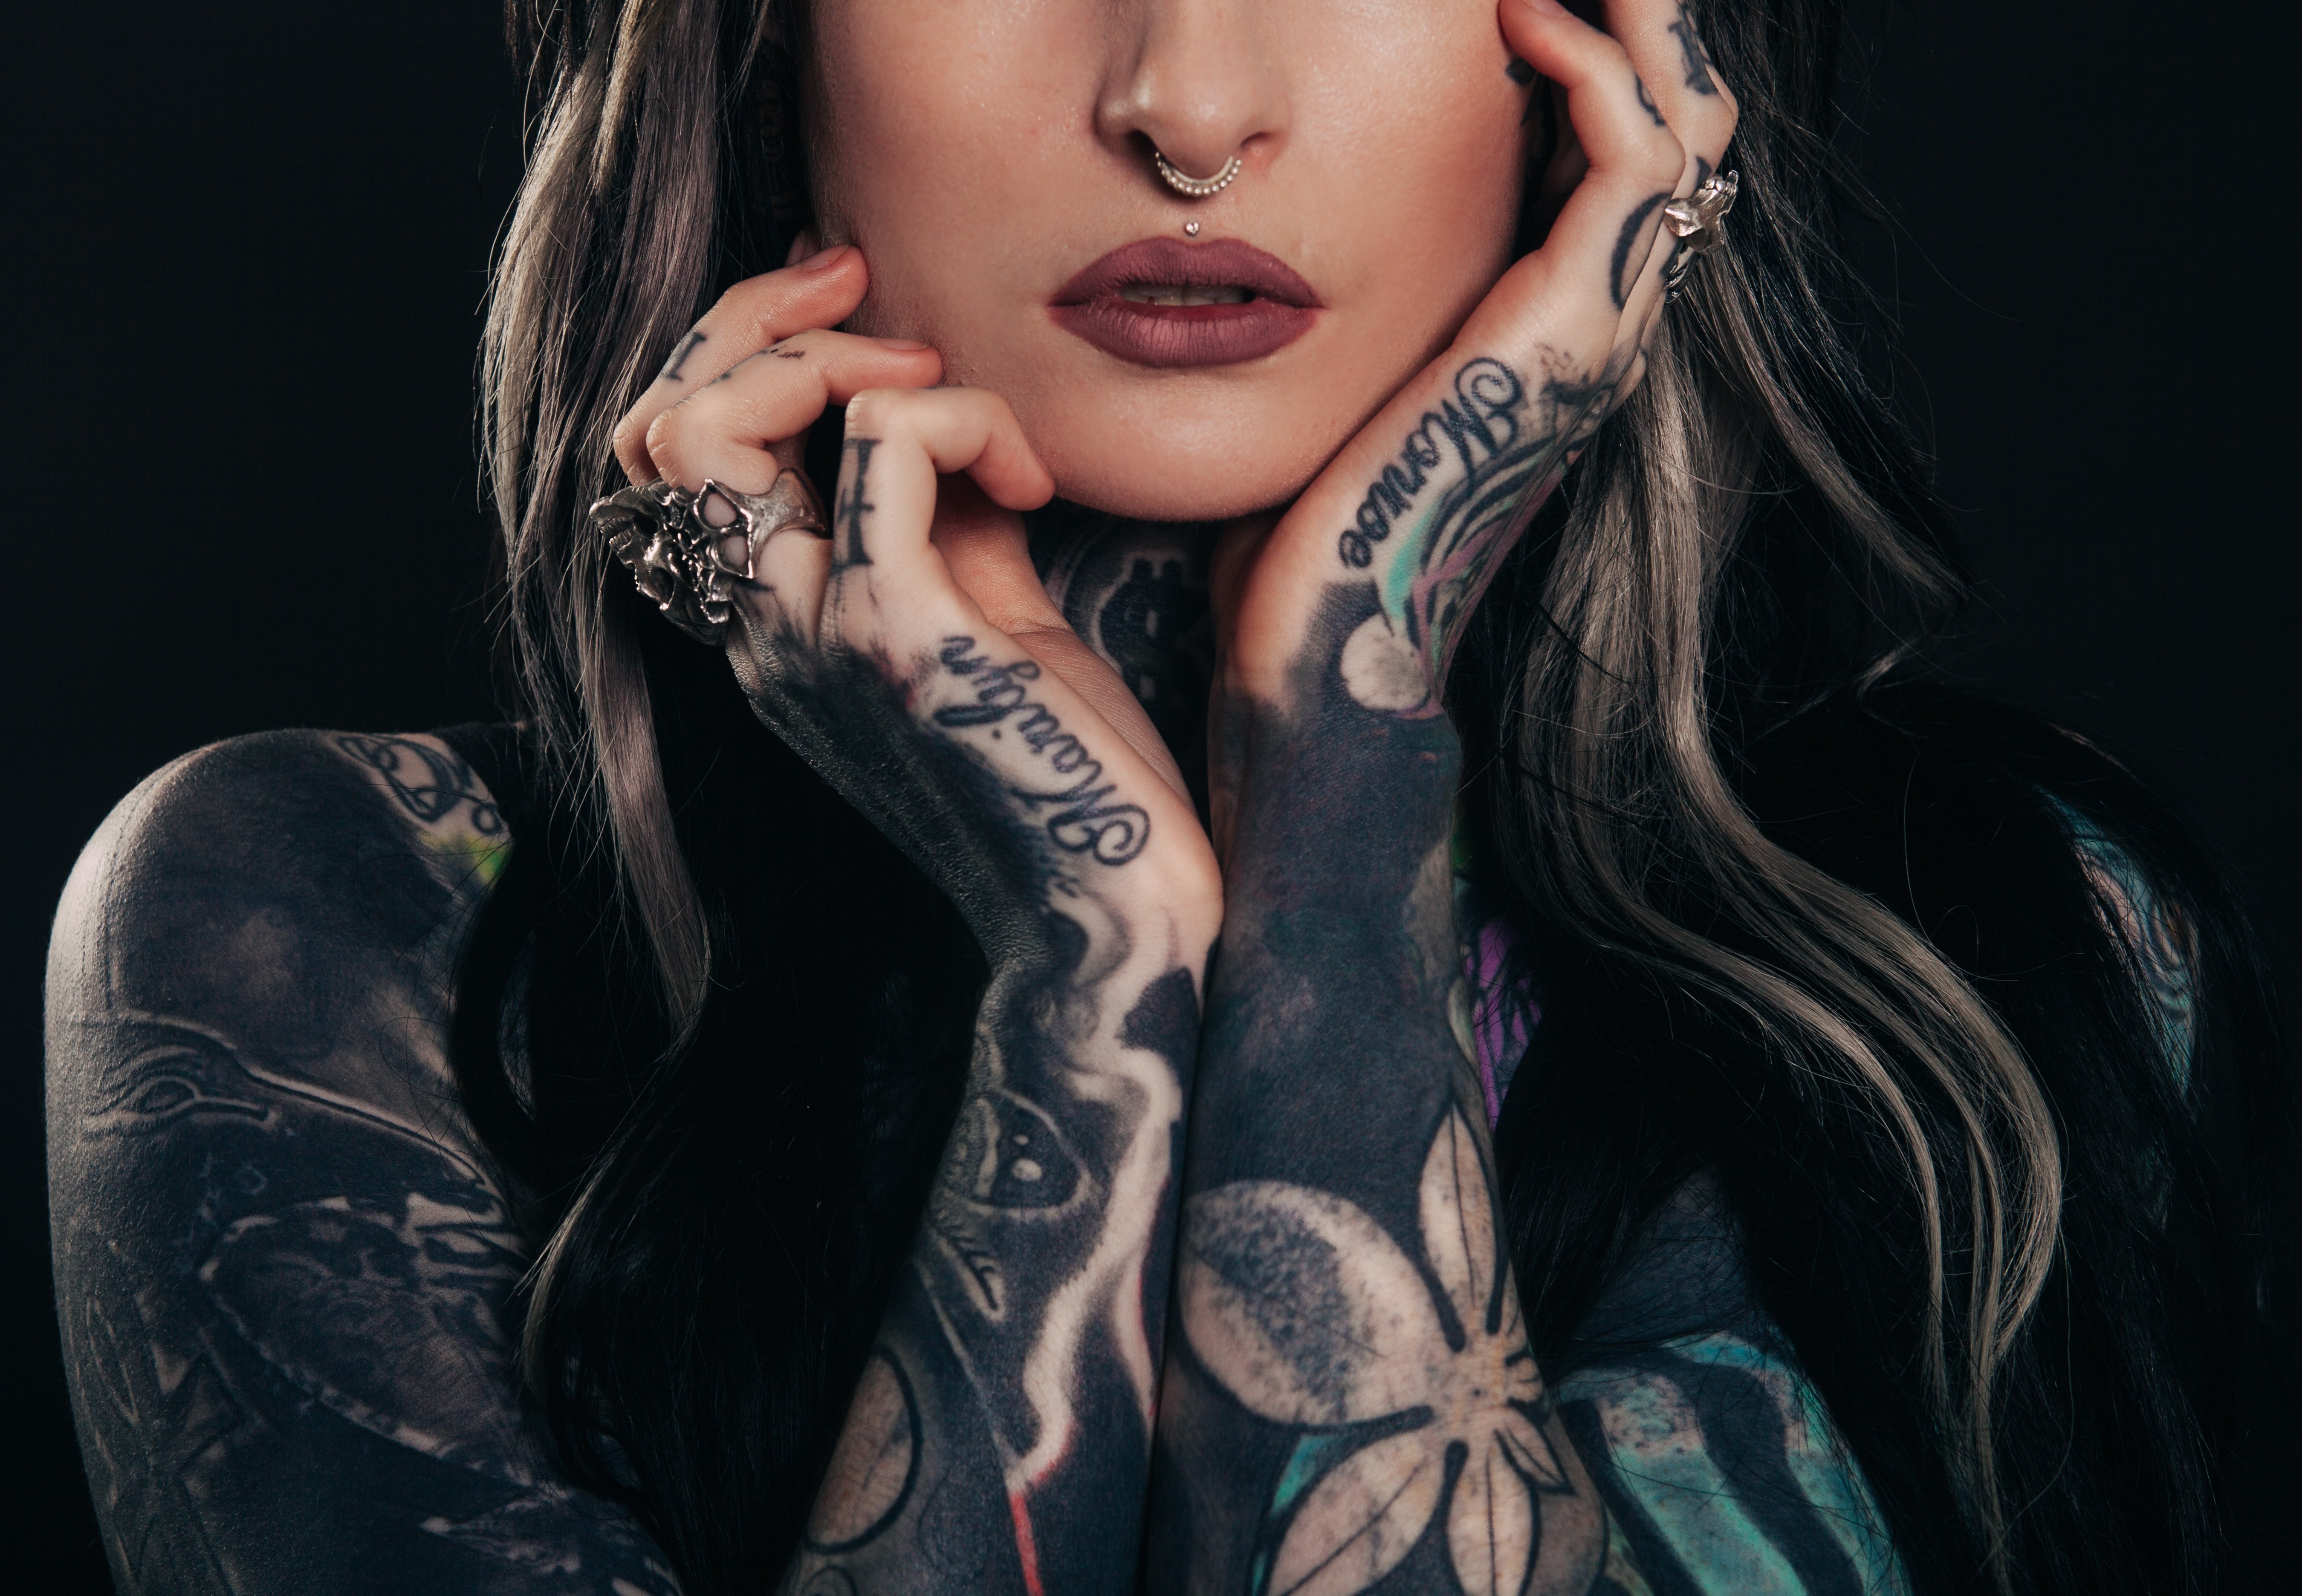 A girl with tattoos | Source: Unsplash.com